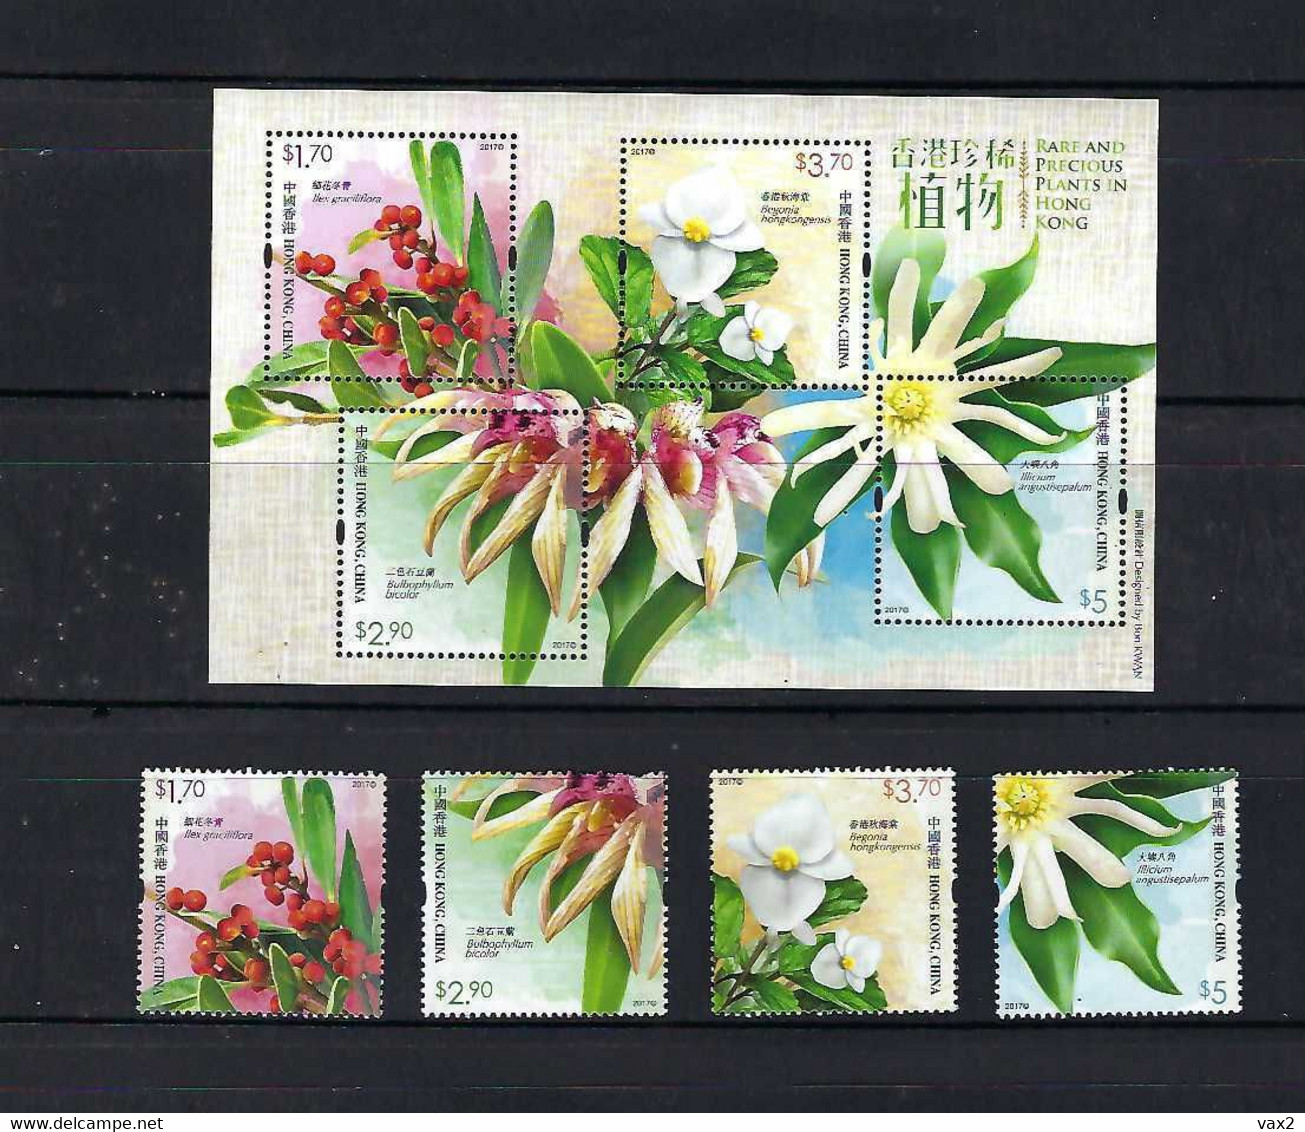 Hong Kong 2017 S#1866-1869a Rare And Precious Plants Set+M/S MNH Flora Flower - Unused Stamps